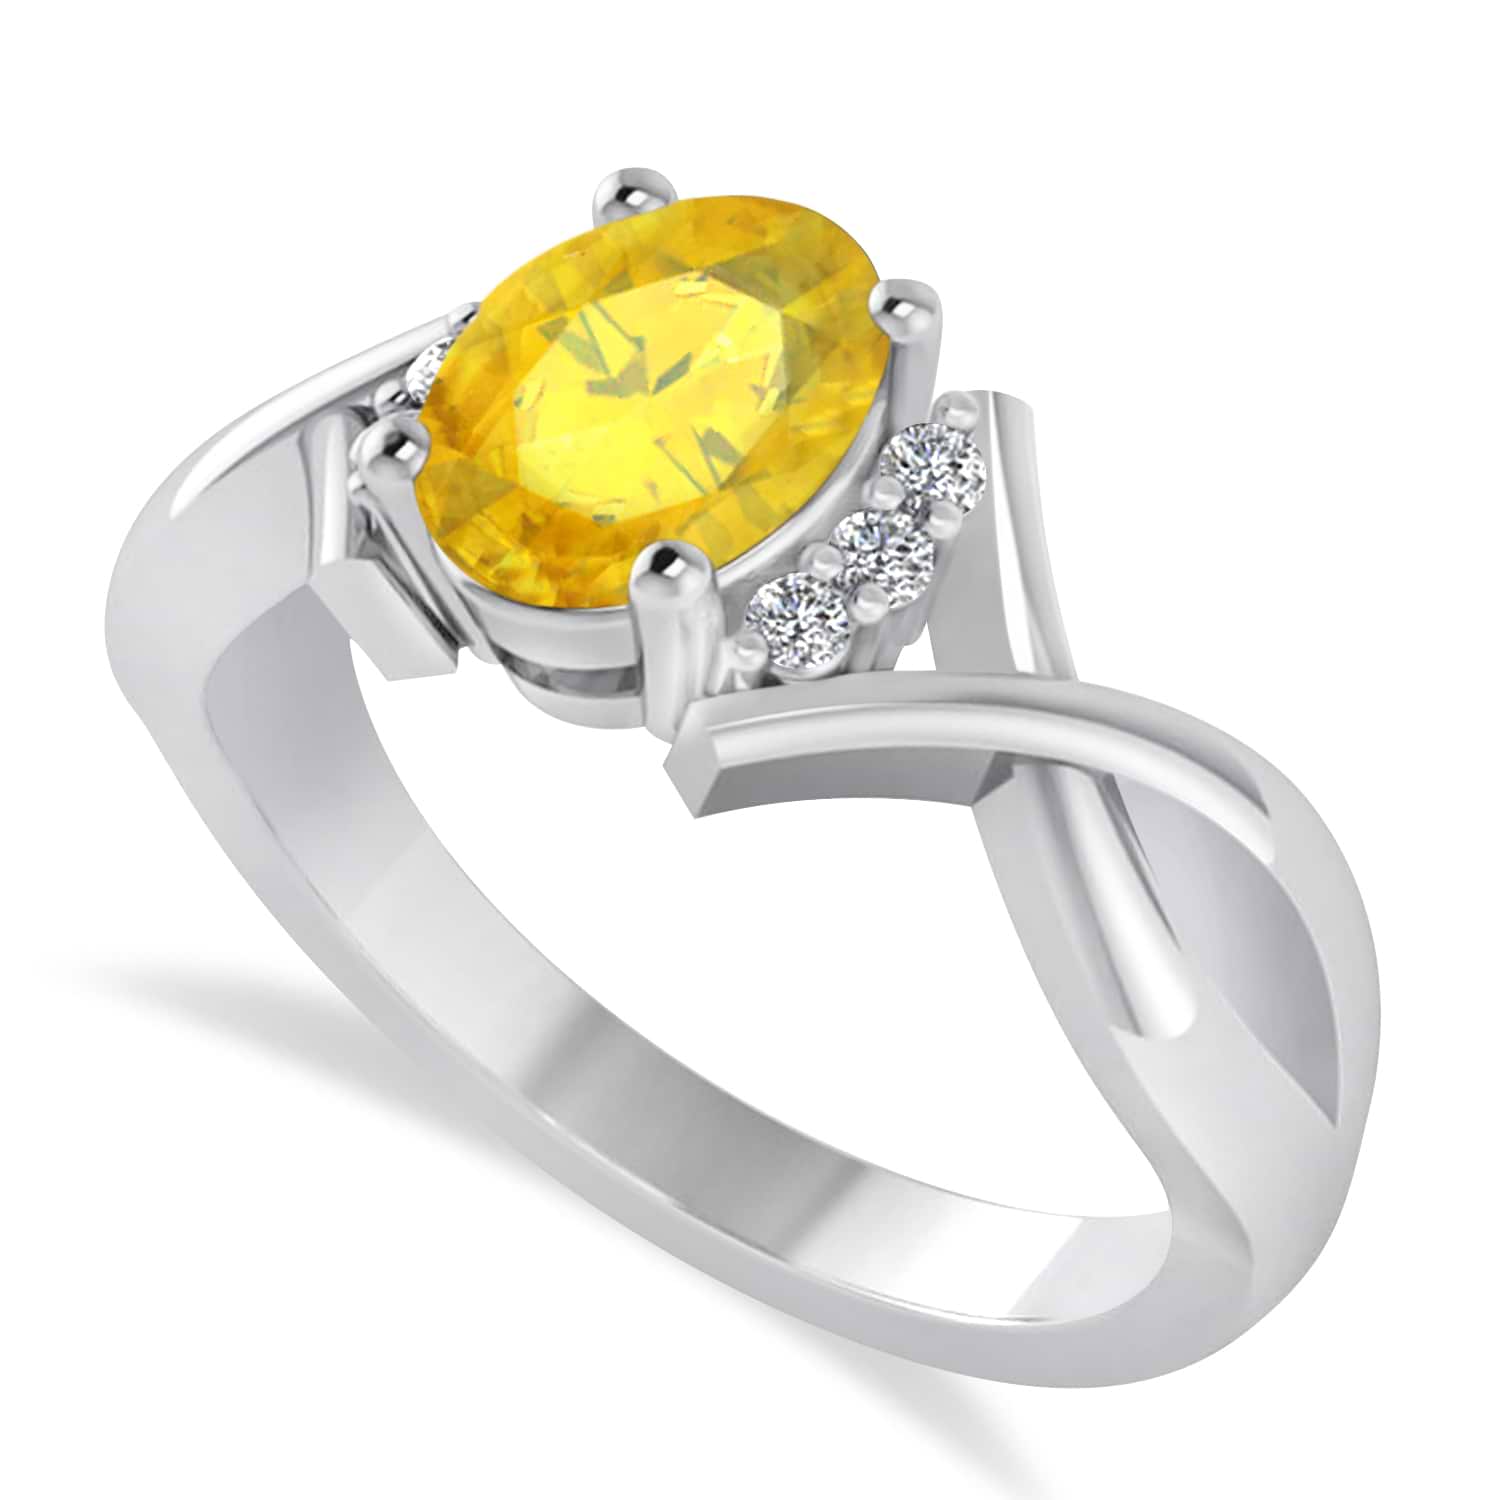 Oval Cut Yellow Sapphire & Diamond Engagement Ring With Split Shank 14k White Gold (1.69ct)